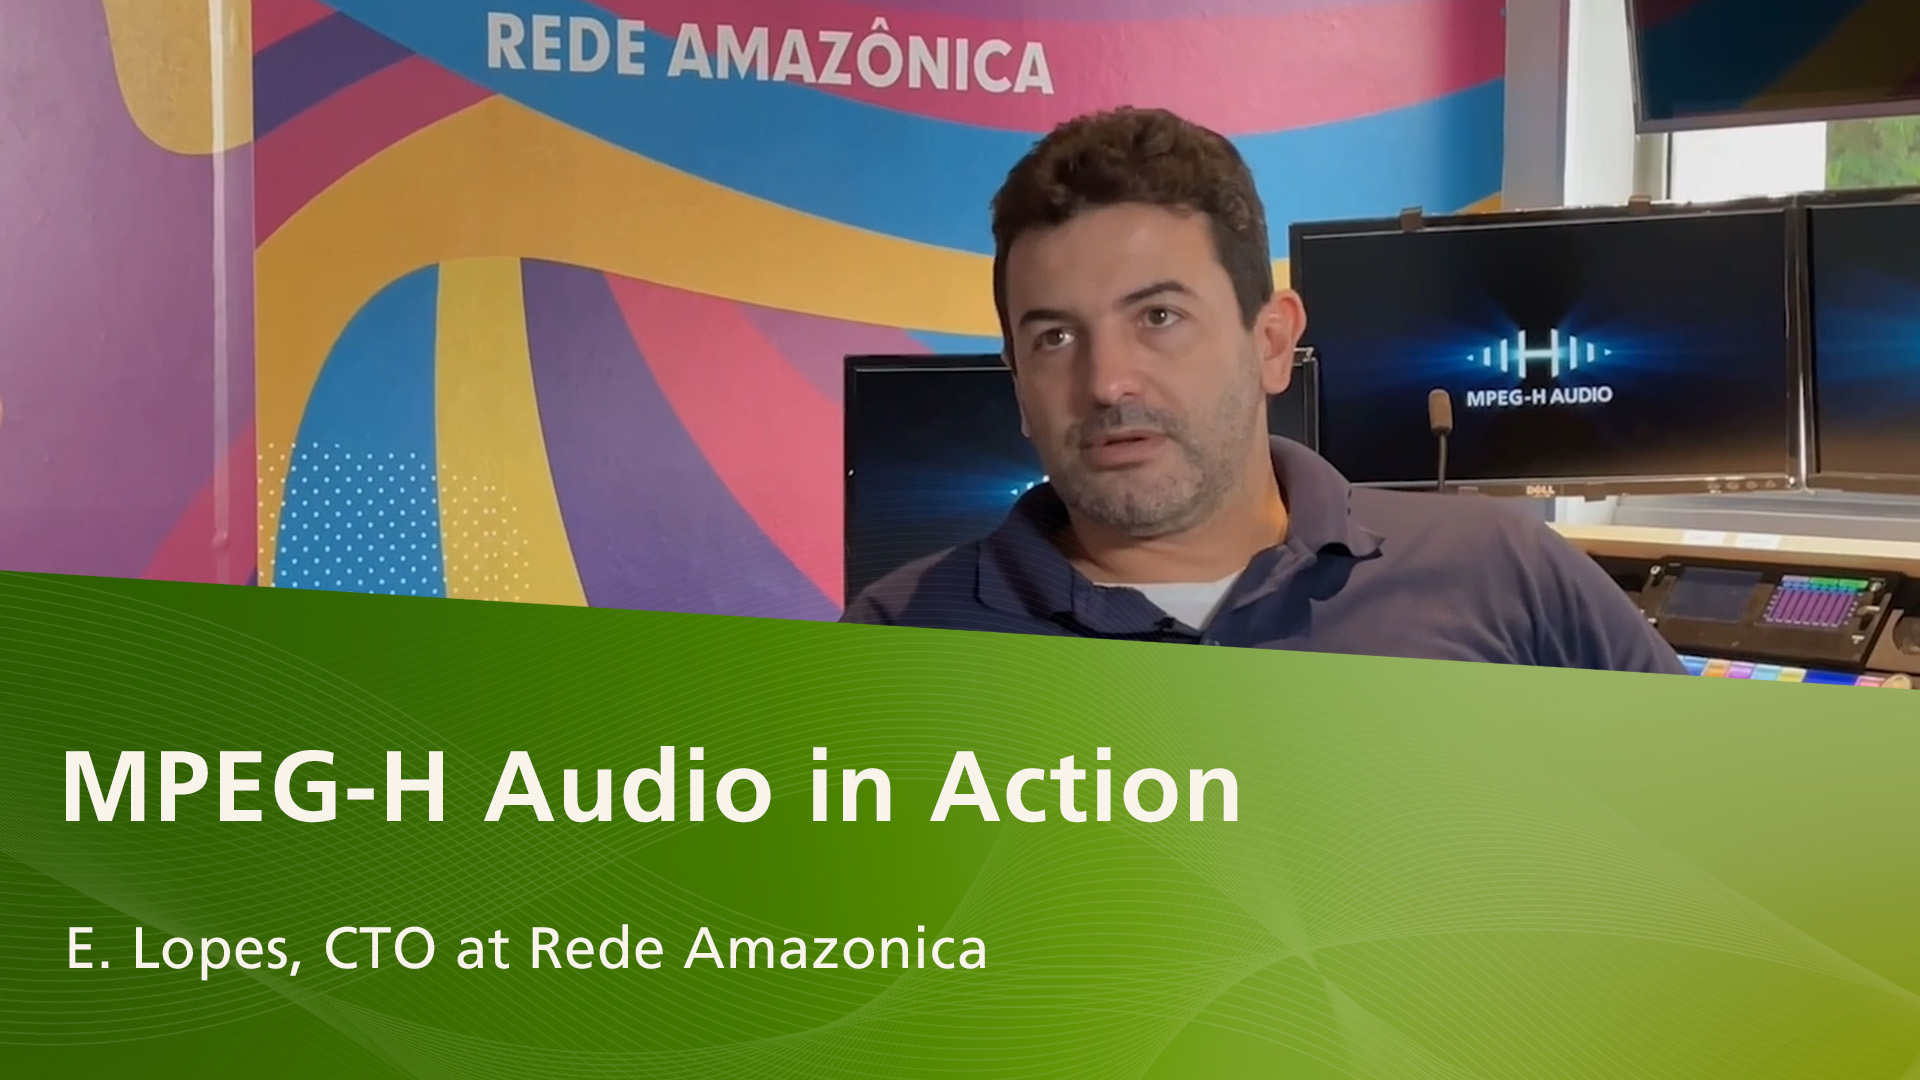 Video MPEG-H Audio in Action Rede Amazonica Lopes